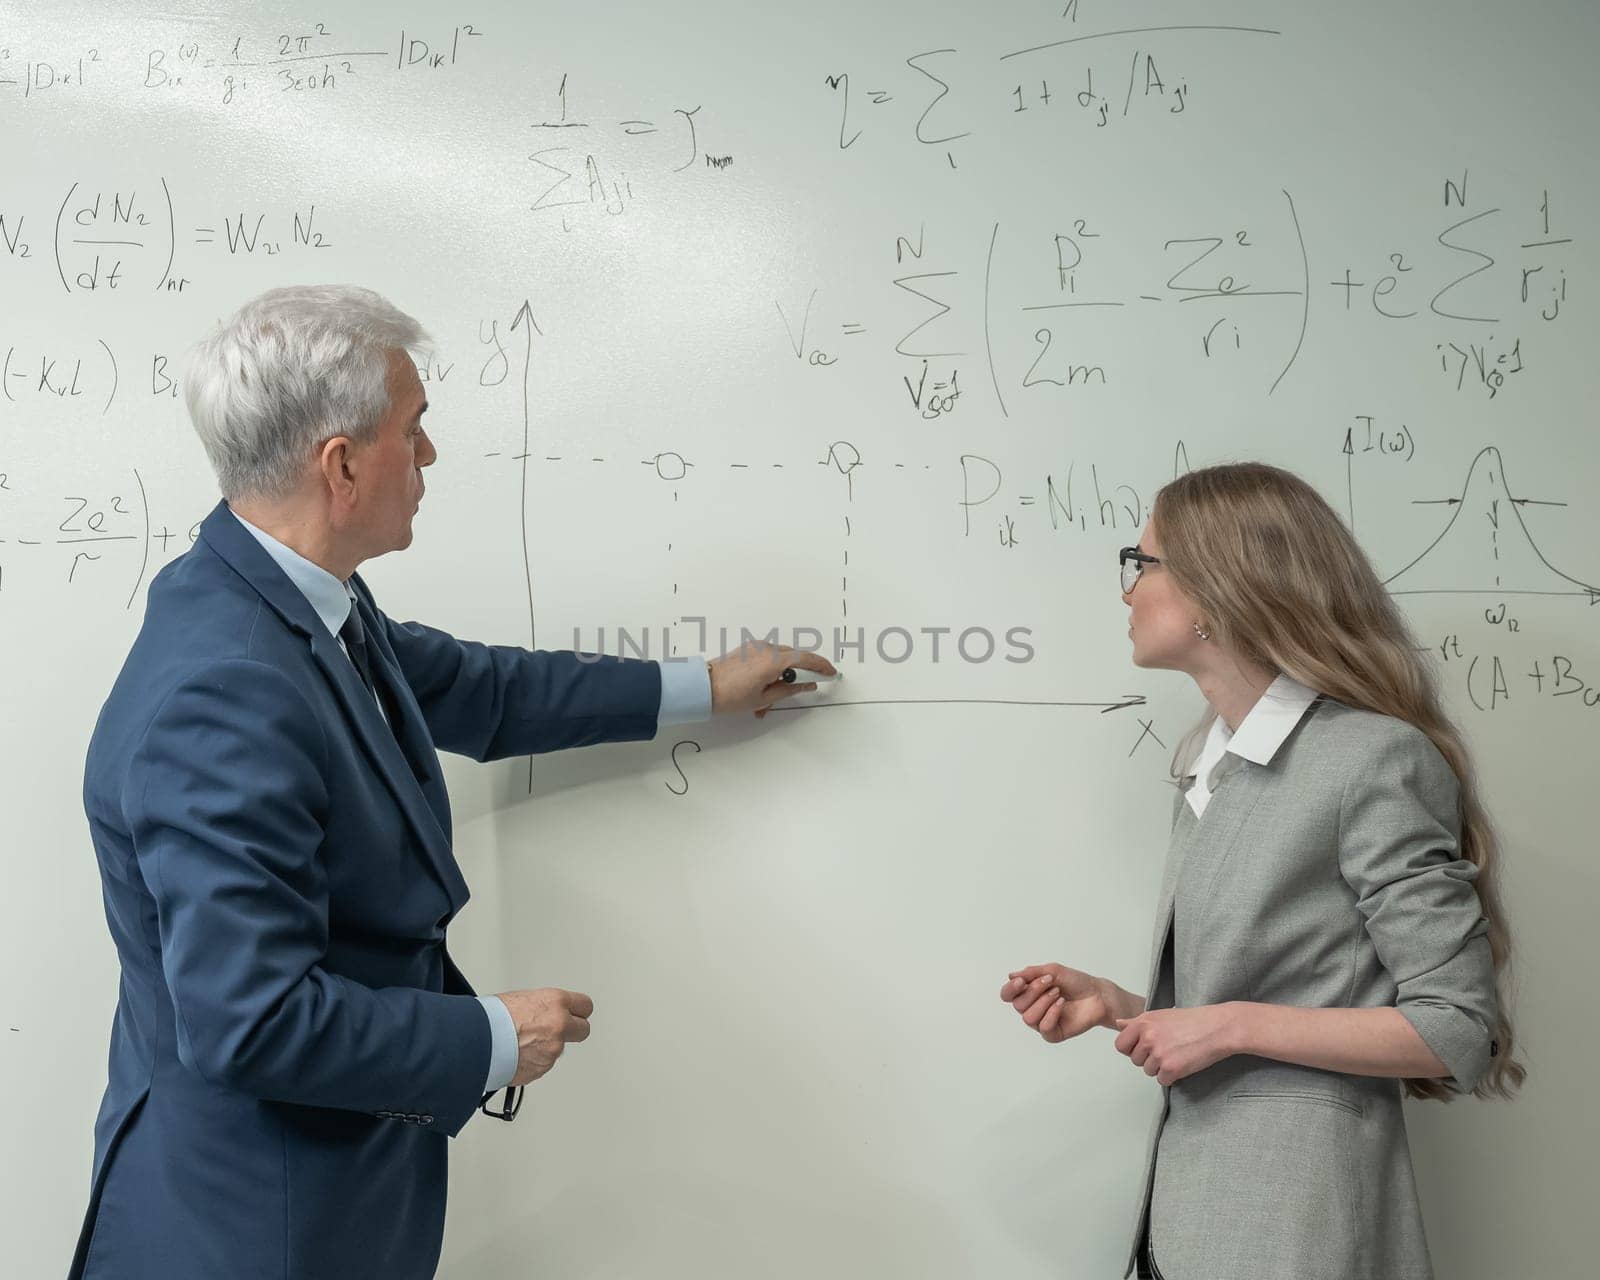 An elderly professor explains a subject to a student at a white board. by mrwed54